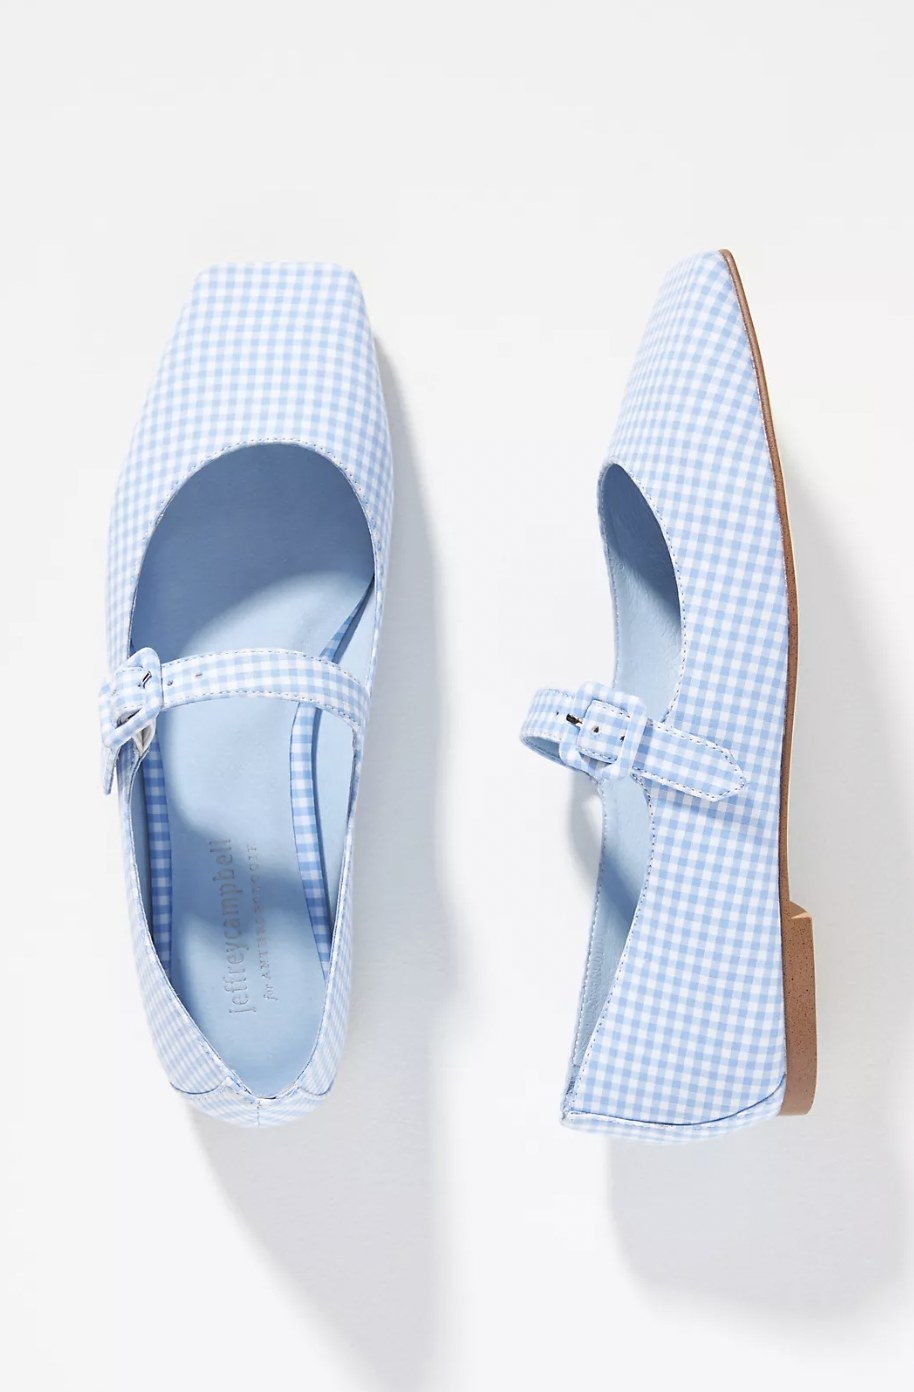 The blue gingham flats